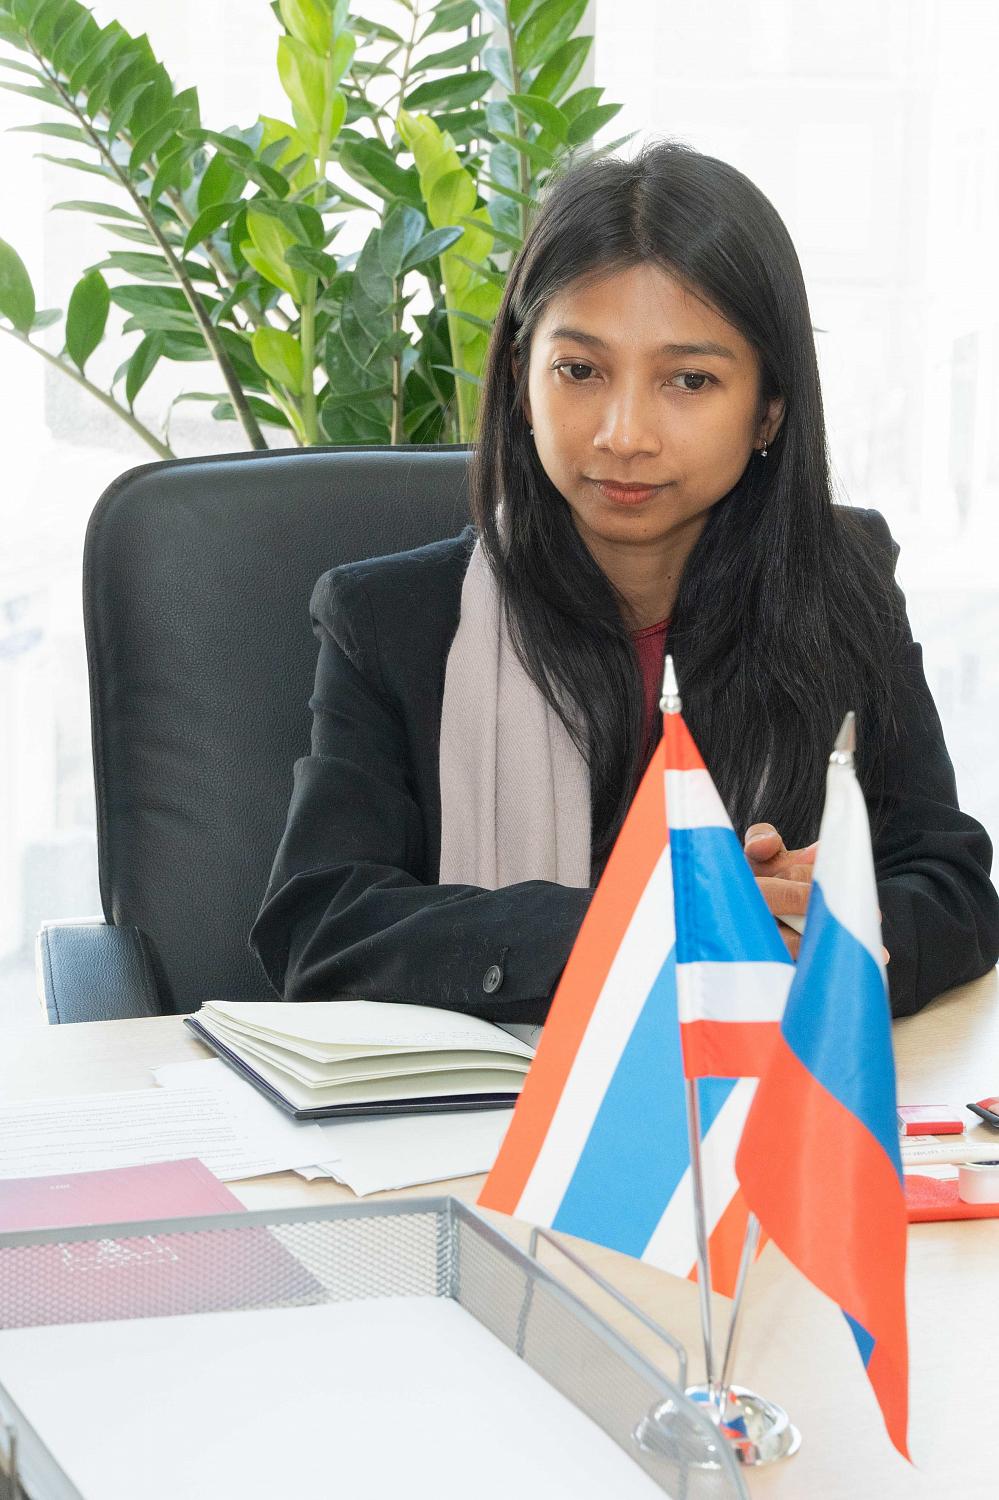 Moscow and Thailand are interested in developing joint work